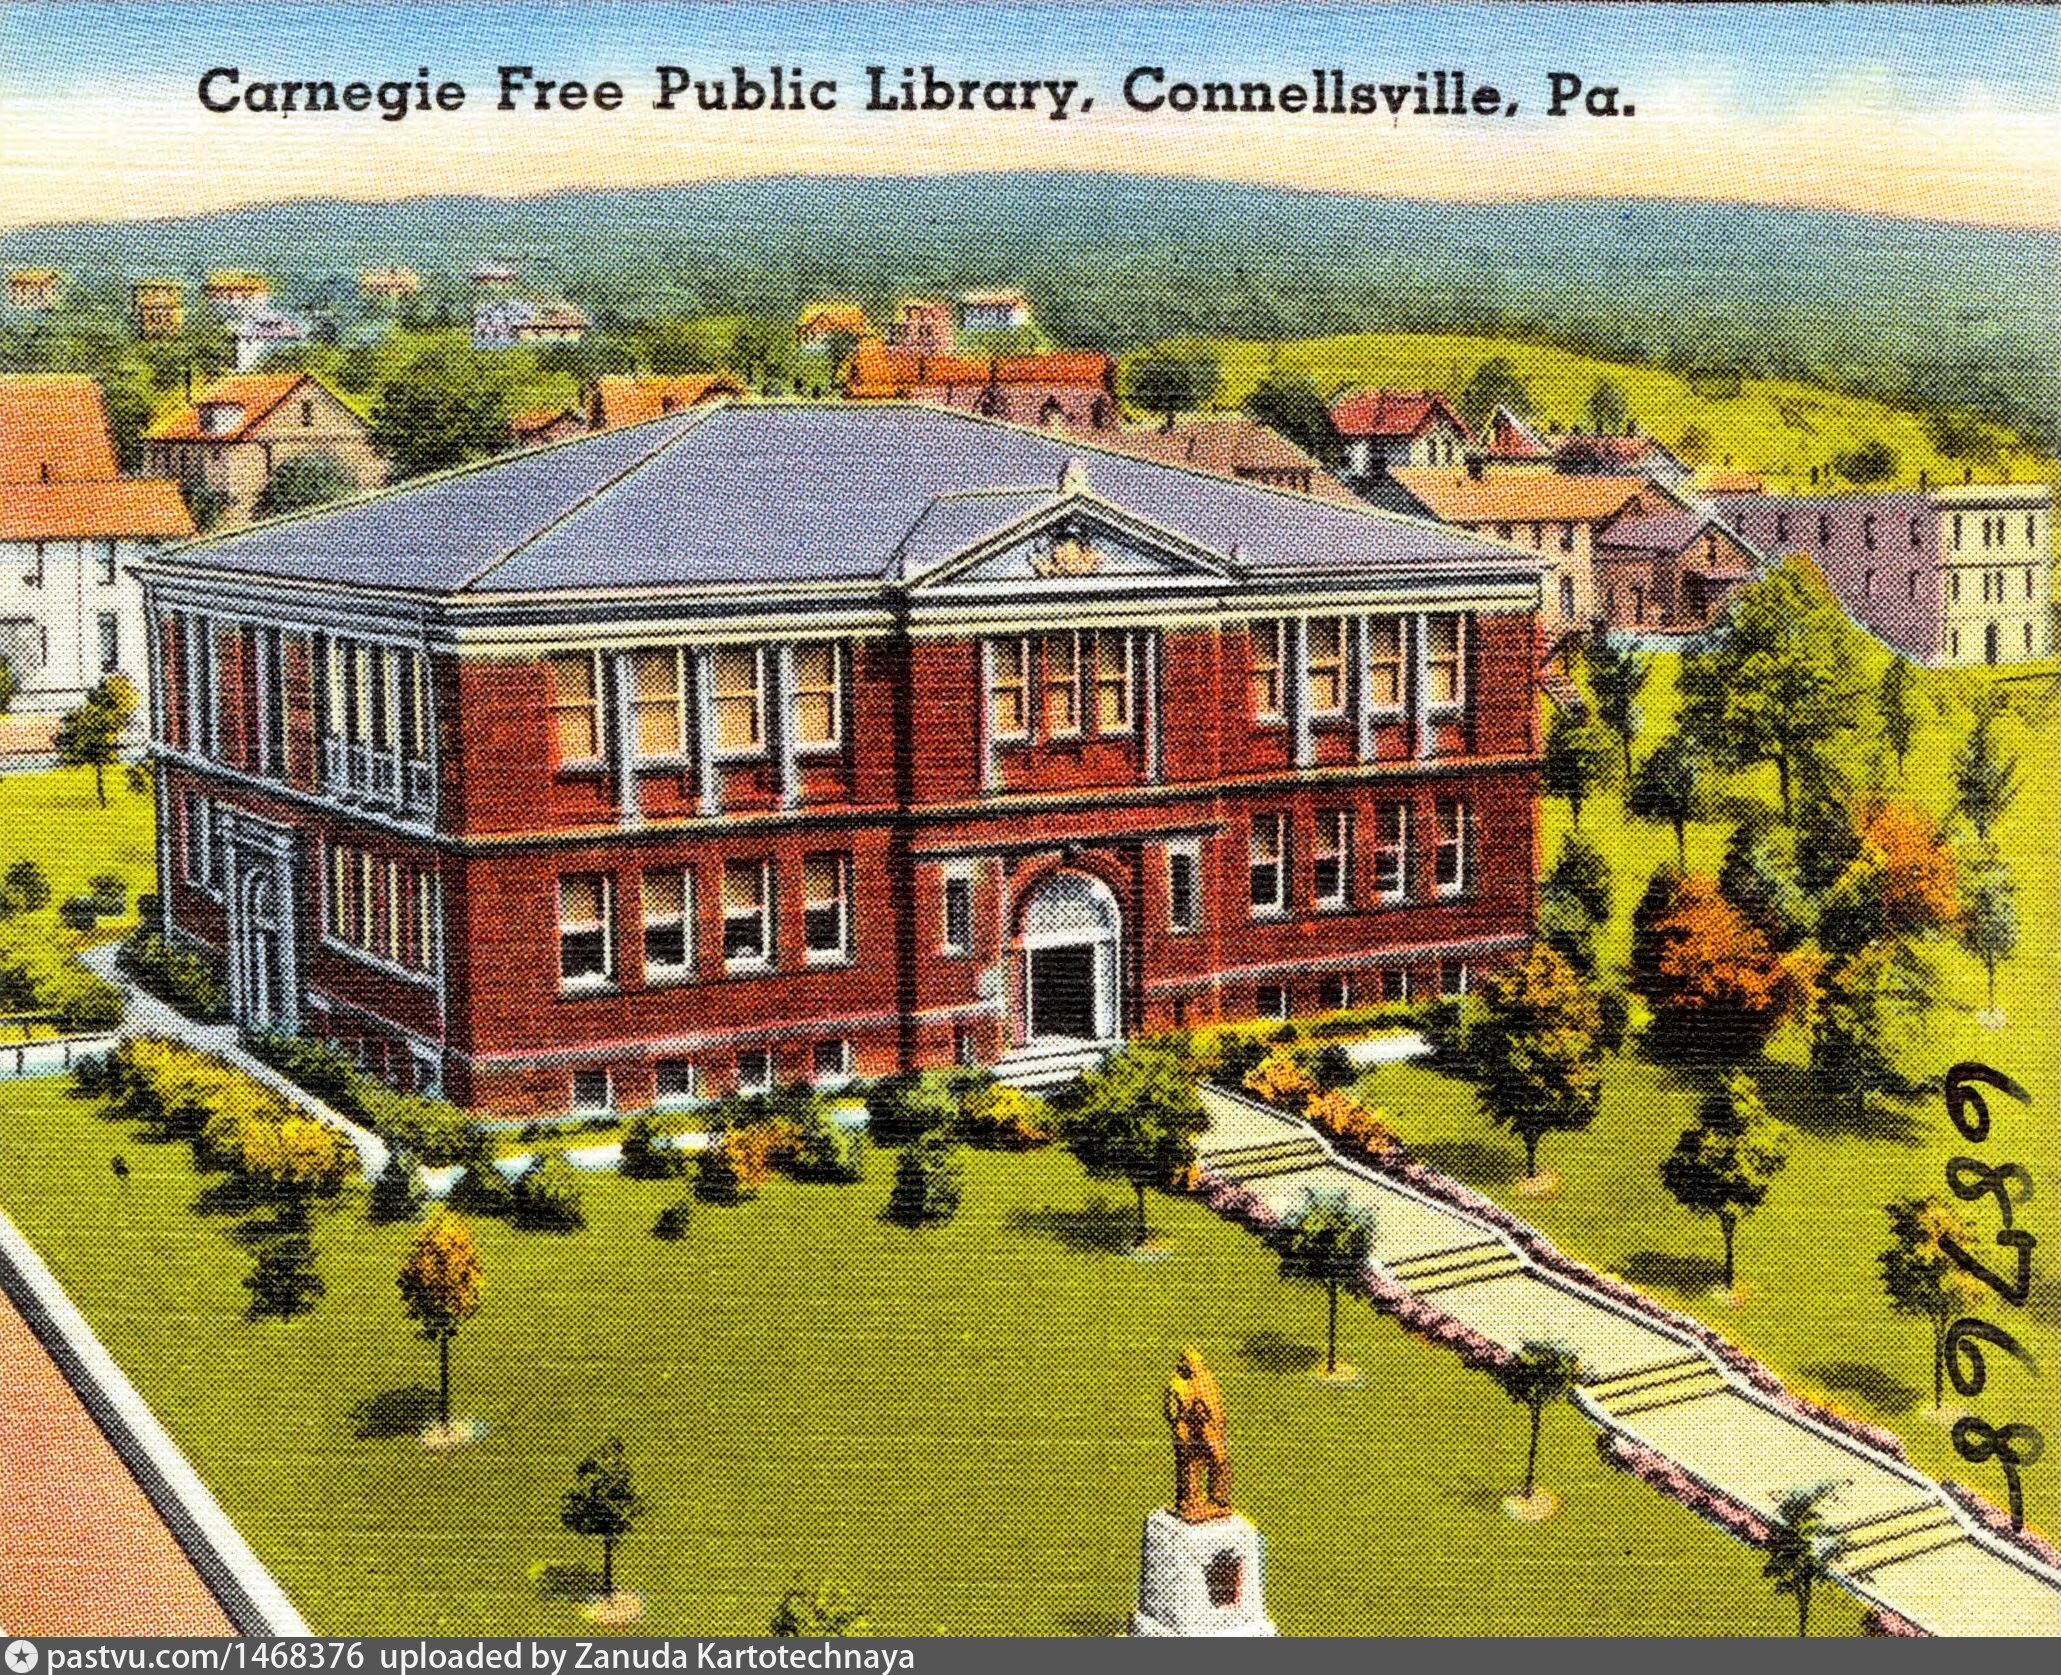 Connellsville. Carnegie Free Library & Crawford Monument